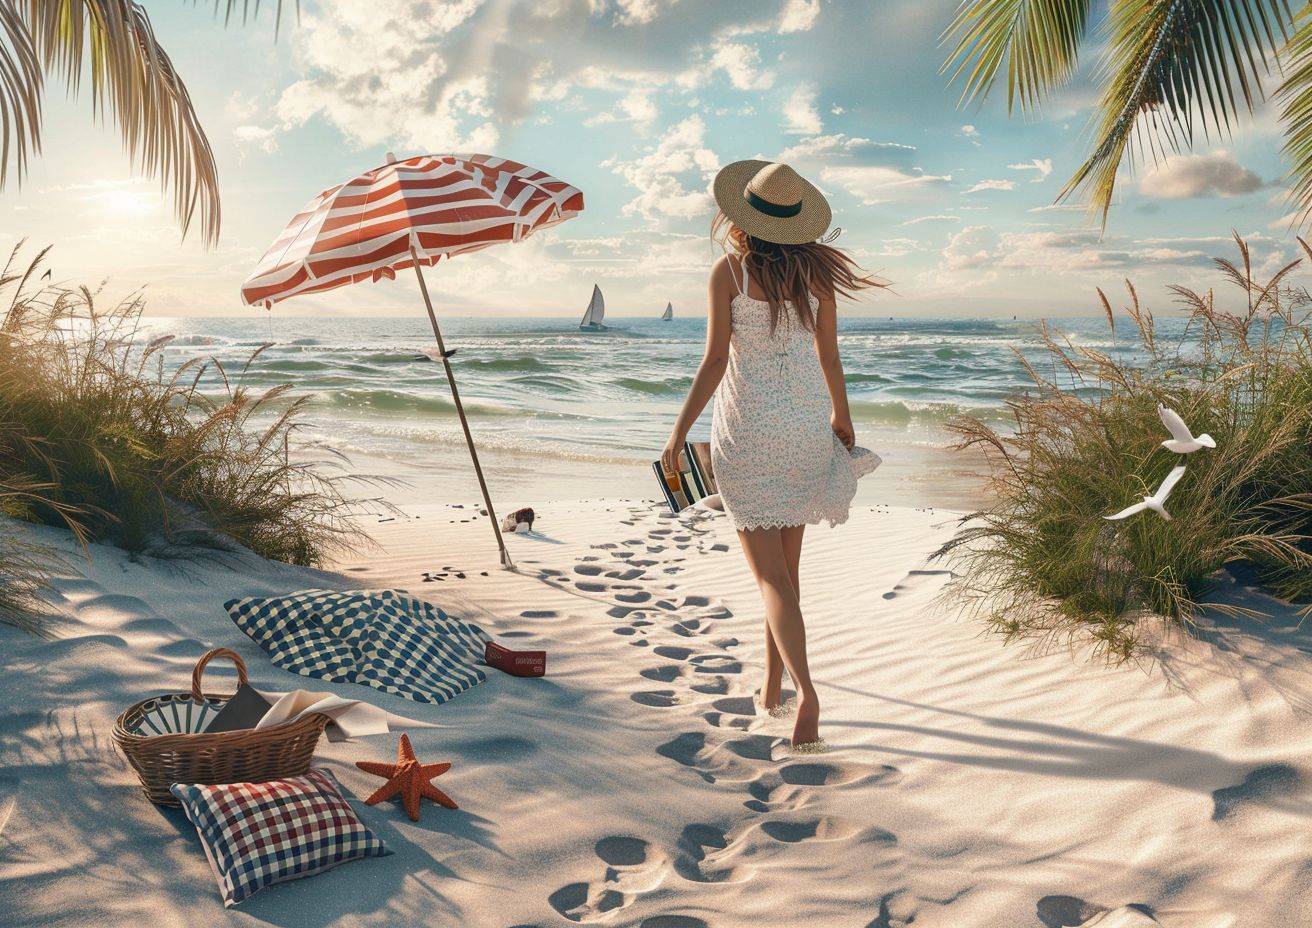 The main subject is an adult female, walking towards the shore, leaving footprints in the sand. She is dressed in a light summer dress, barefoot, with her hair caught in the breeze. She wears a sun hat, and is holding a book in one hand. Around her, seagulls fly overhead, with palm trees and dune grass dotting the shoreline. In the foreground, a red and white striped beach umbrella anchors firmly in the sand, providing shade next to a blue and white checkered blanket laid out with a picnic basket, plates, and a wine bottle visible. Nearby, a starfish lies in the sand. The background is dominated by the setting sun casting golden hues over the ocean, with a distant sailboat visible on the horizon. 👣 The composition is from a third-person view, slightly elevated, focusing on the woman walking and the trail of footprints she leaves behind. The lighting is soft and warm, emphasizing the golden hour and casting everything in warm tones of gold, blue, and green, with a focus on the textures of sand, water, and sky. The image is intended for high resolution fine art print, with a keen emphasis on the impressionist style's focus on light and color.